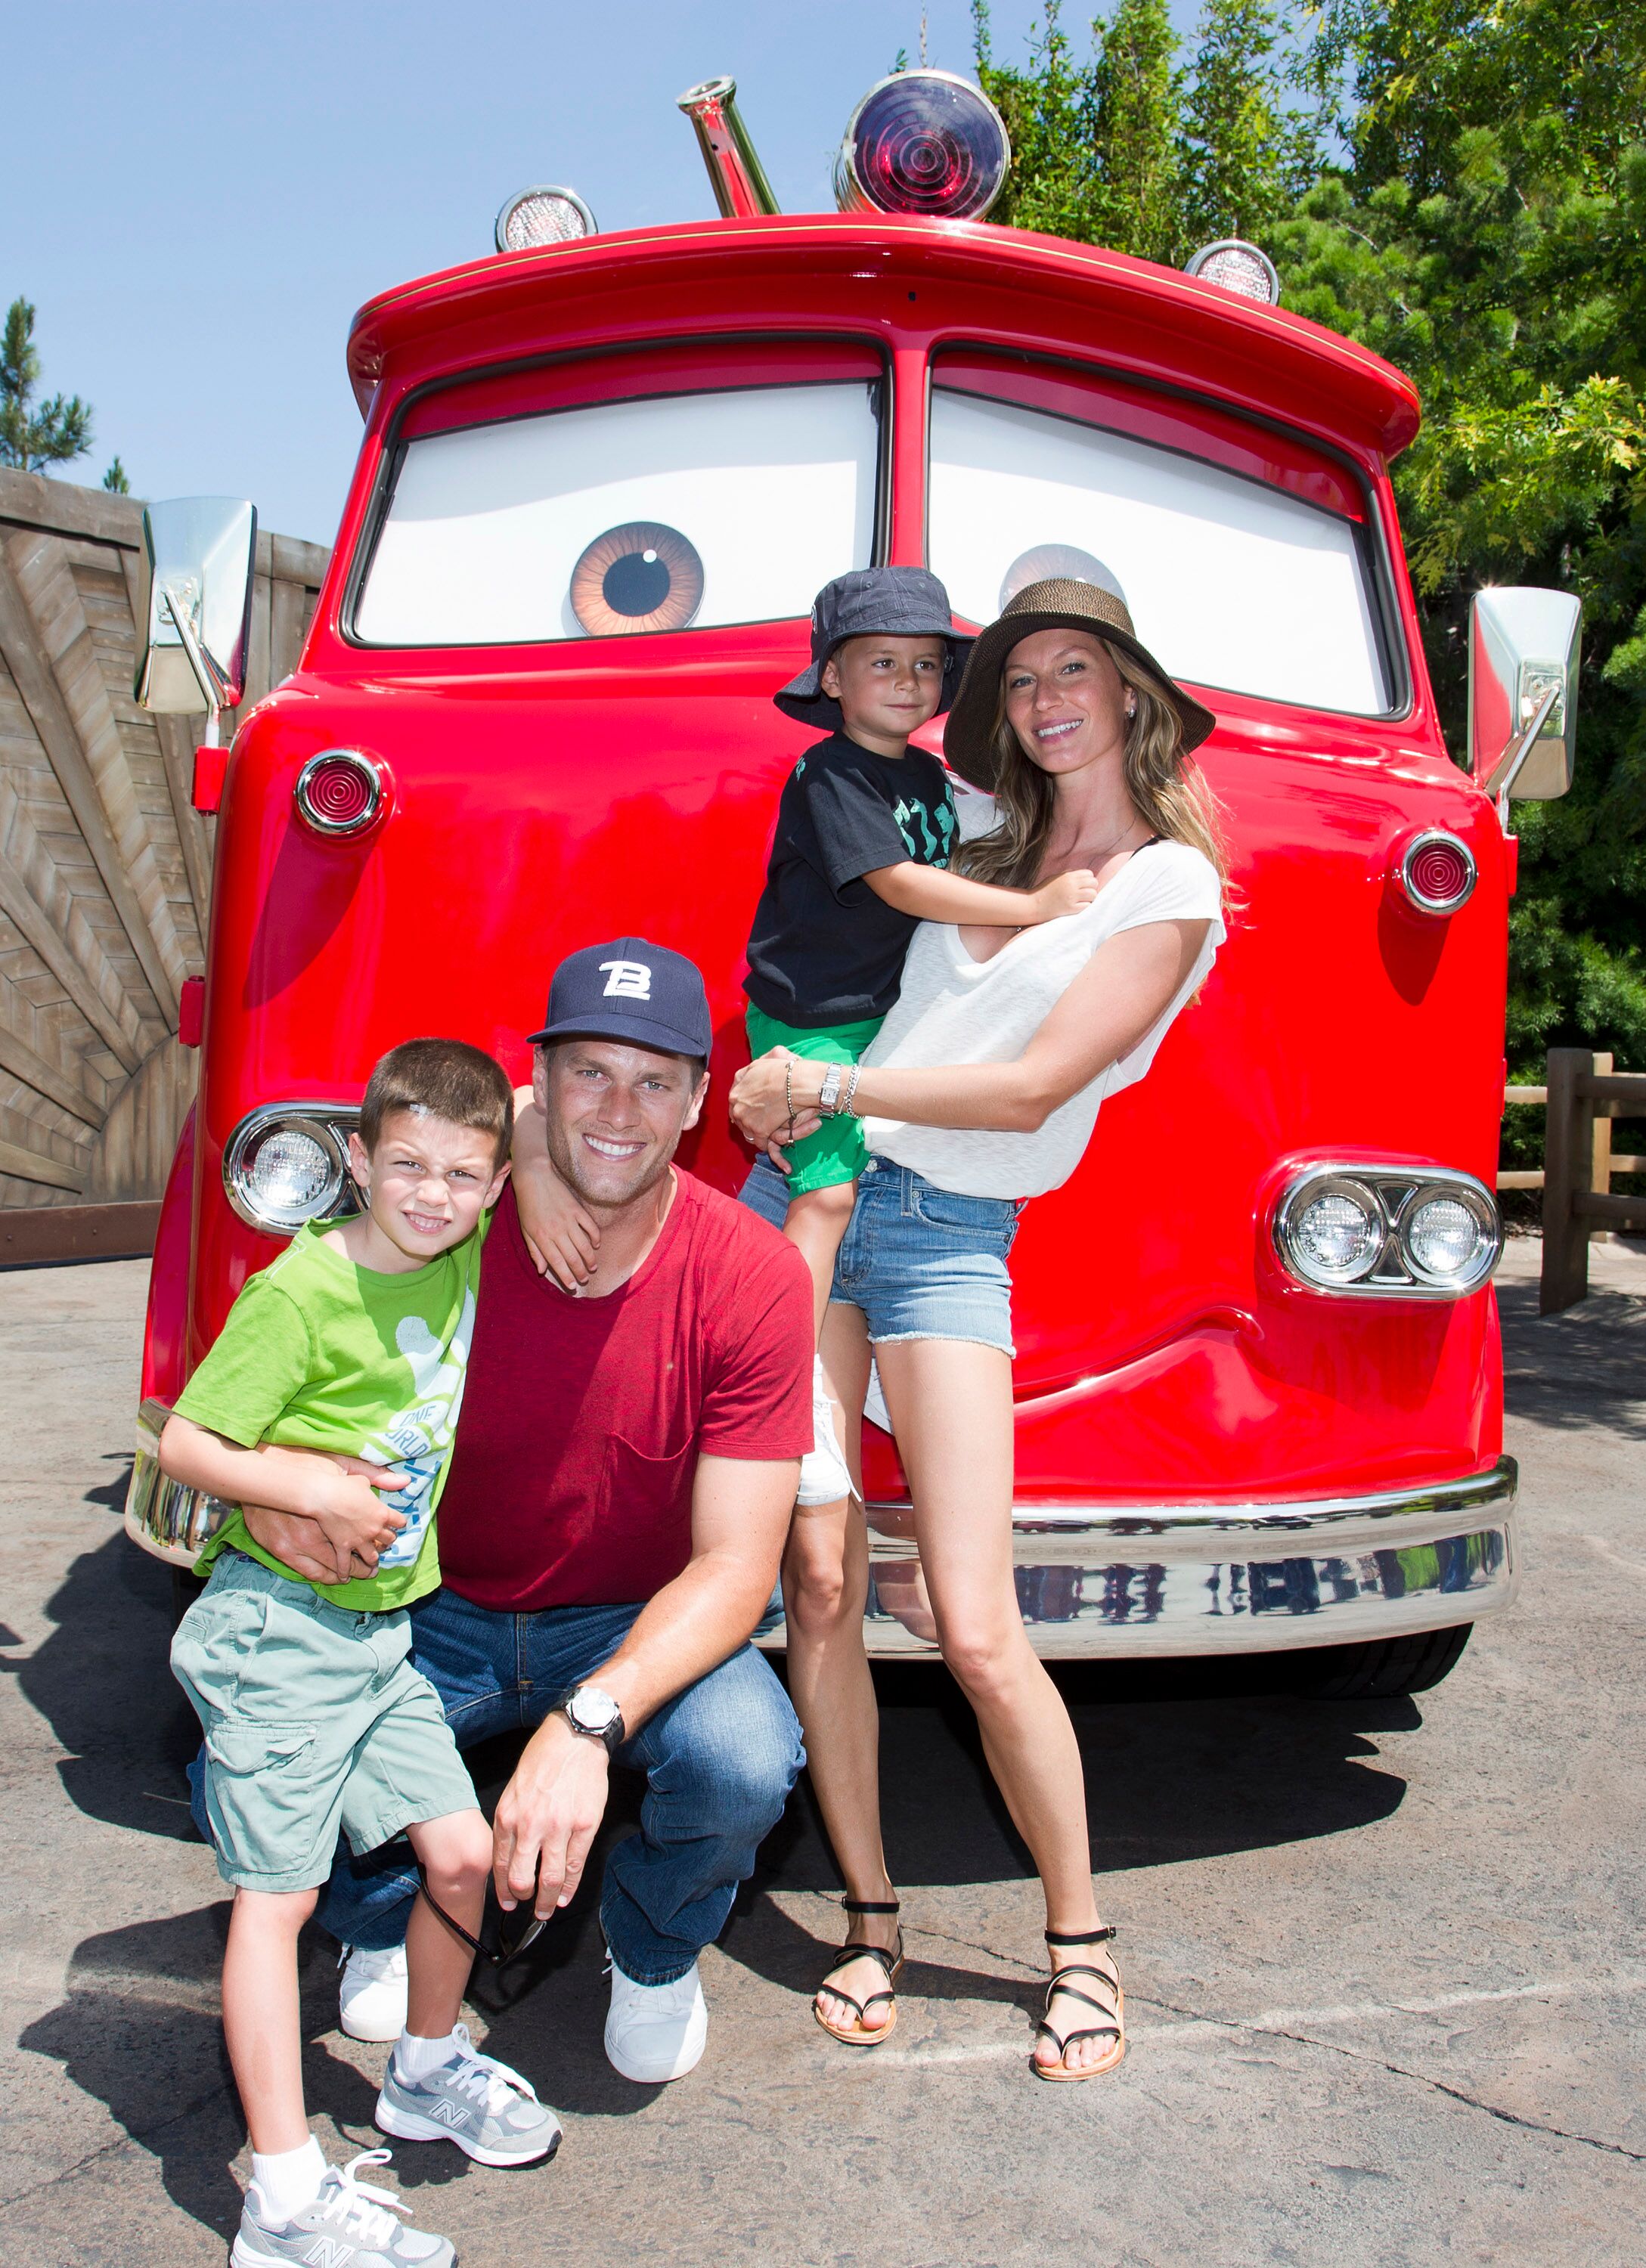 Tom Brady, his son Jack, 5, Gisele Bundchen, and their son Benjamin, 3, pose with Red the Fire Truck at Cars Land at Disney California Adventure park  | Getty Images